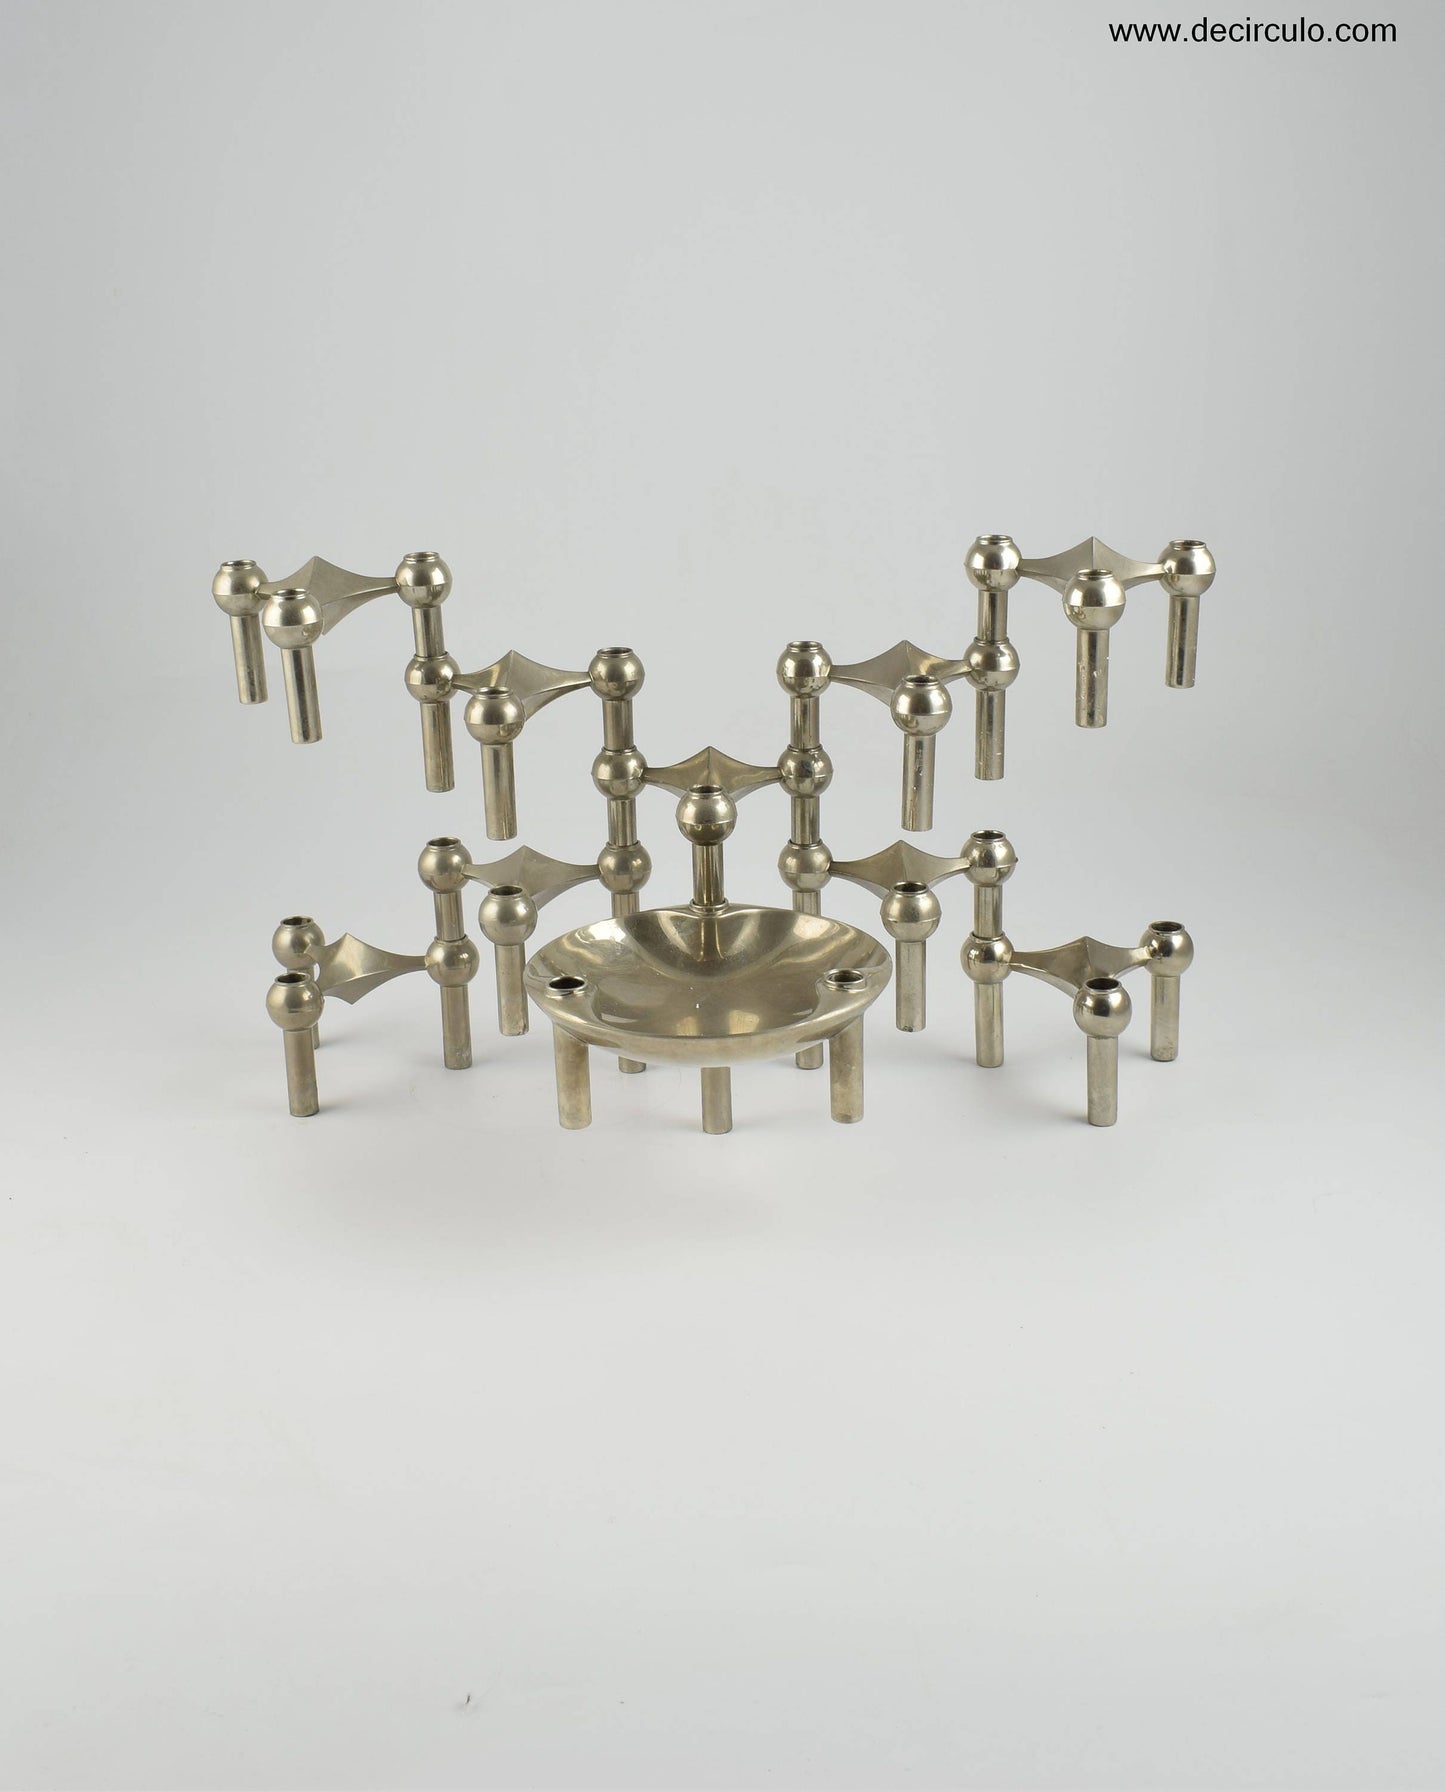 Set of 10 with bowl nagel stackable Candle holders designed by Ceasar Stoffi and Fritz Nagel and manufactured by BMF